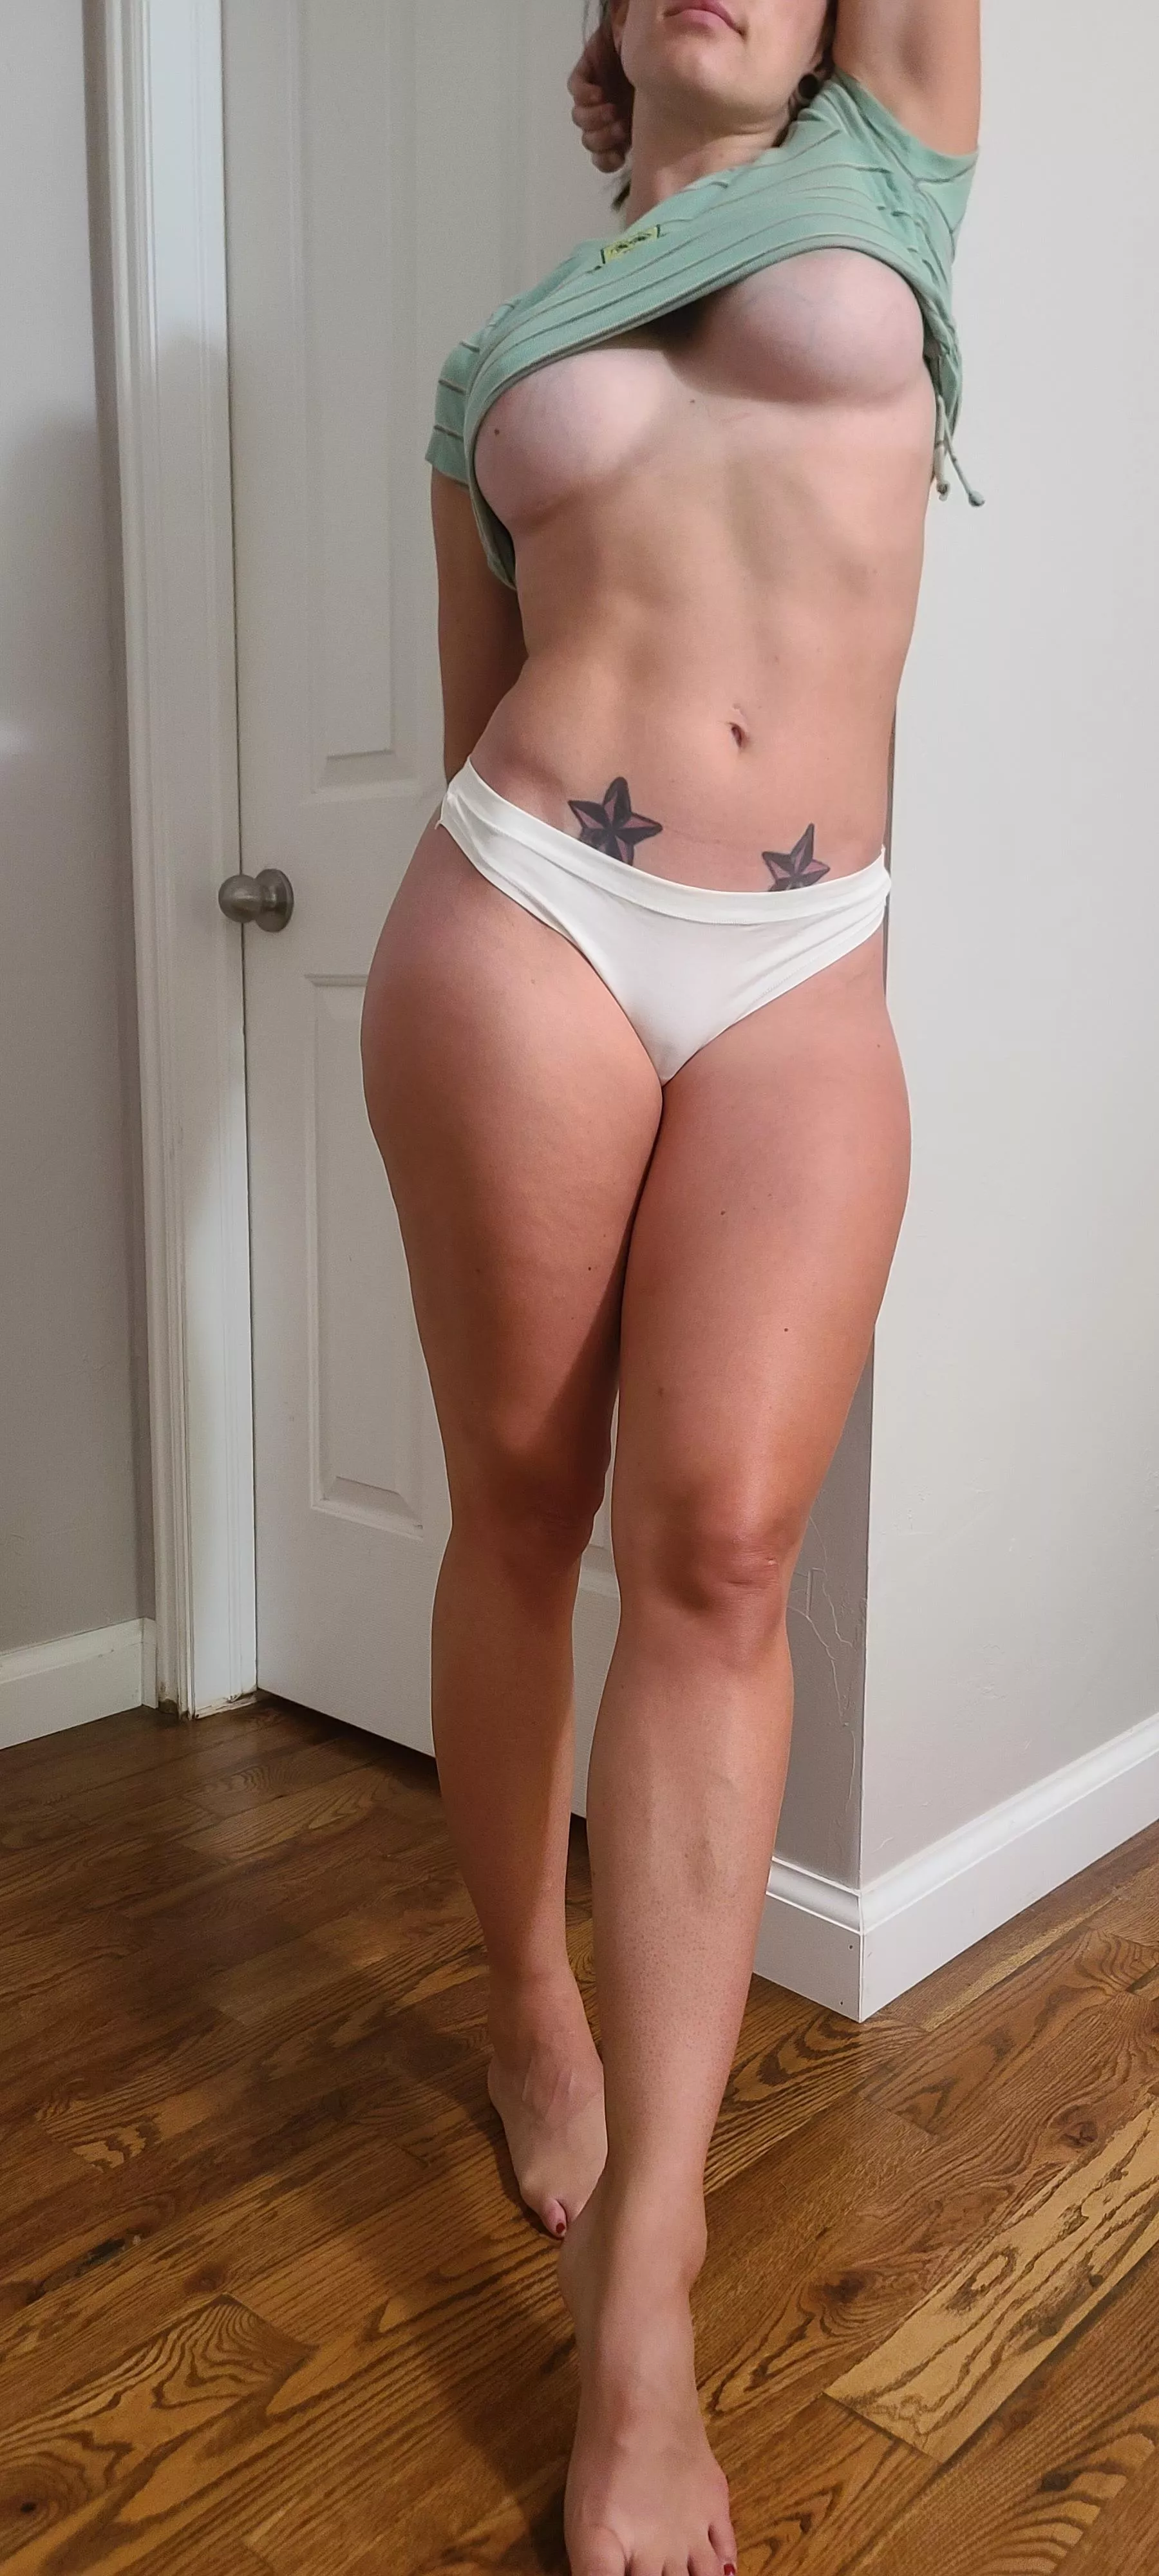 Long Legs Panties - start at my feet and work your way up my long legs. You can watch these  white panties get soaked. nudes by Kacielayne74